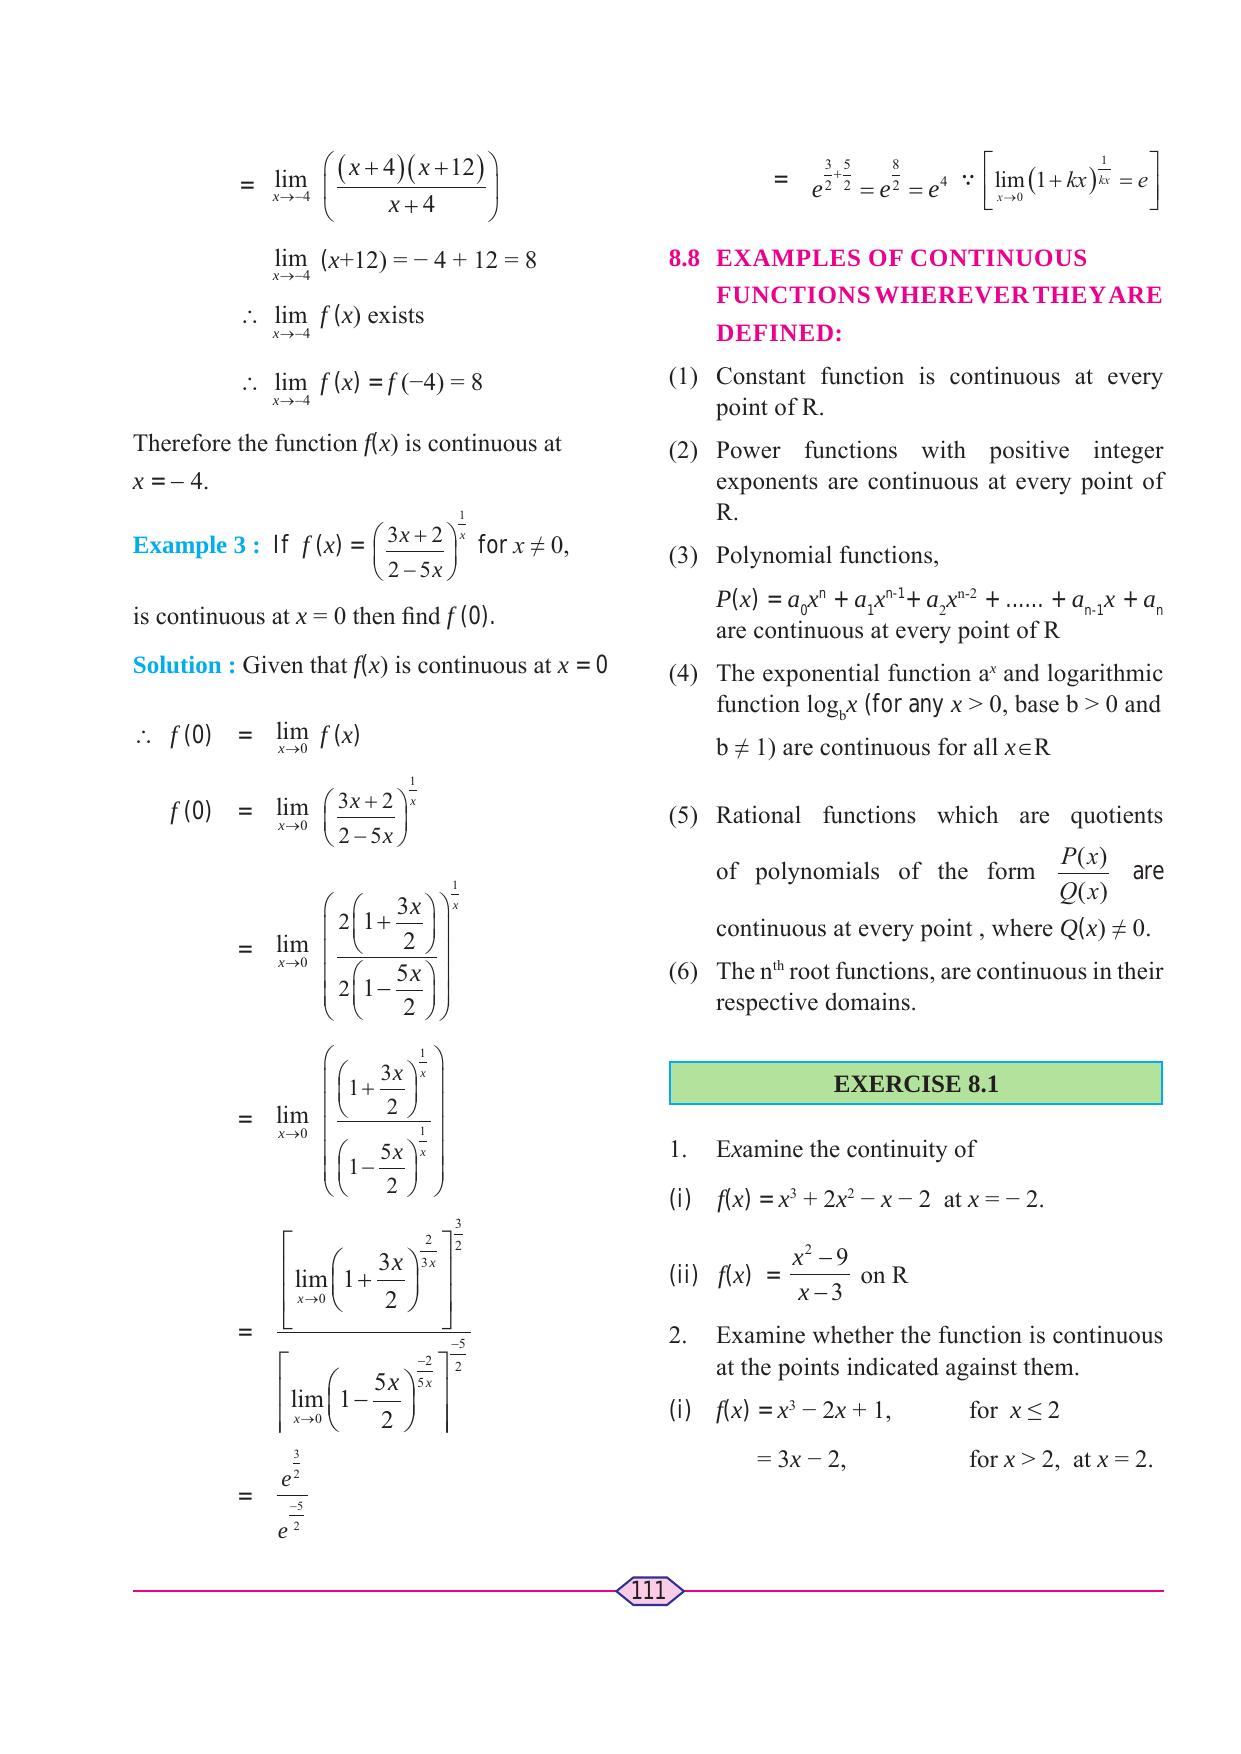 Maharashtra Board Class 11 Maths (Commerce) (Part 1) Textbook - Page 121